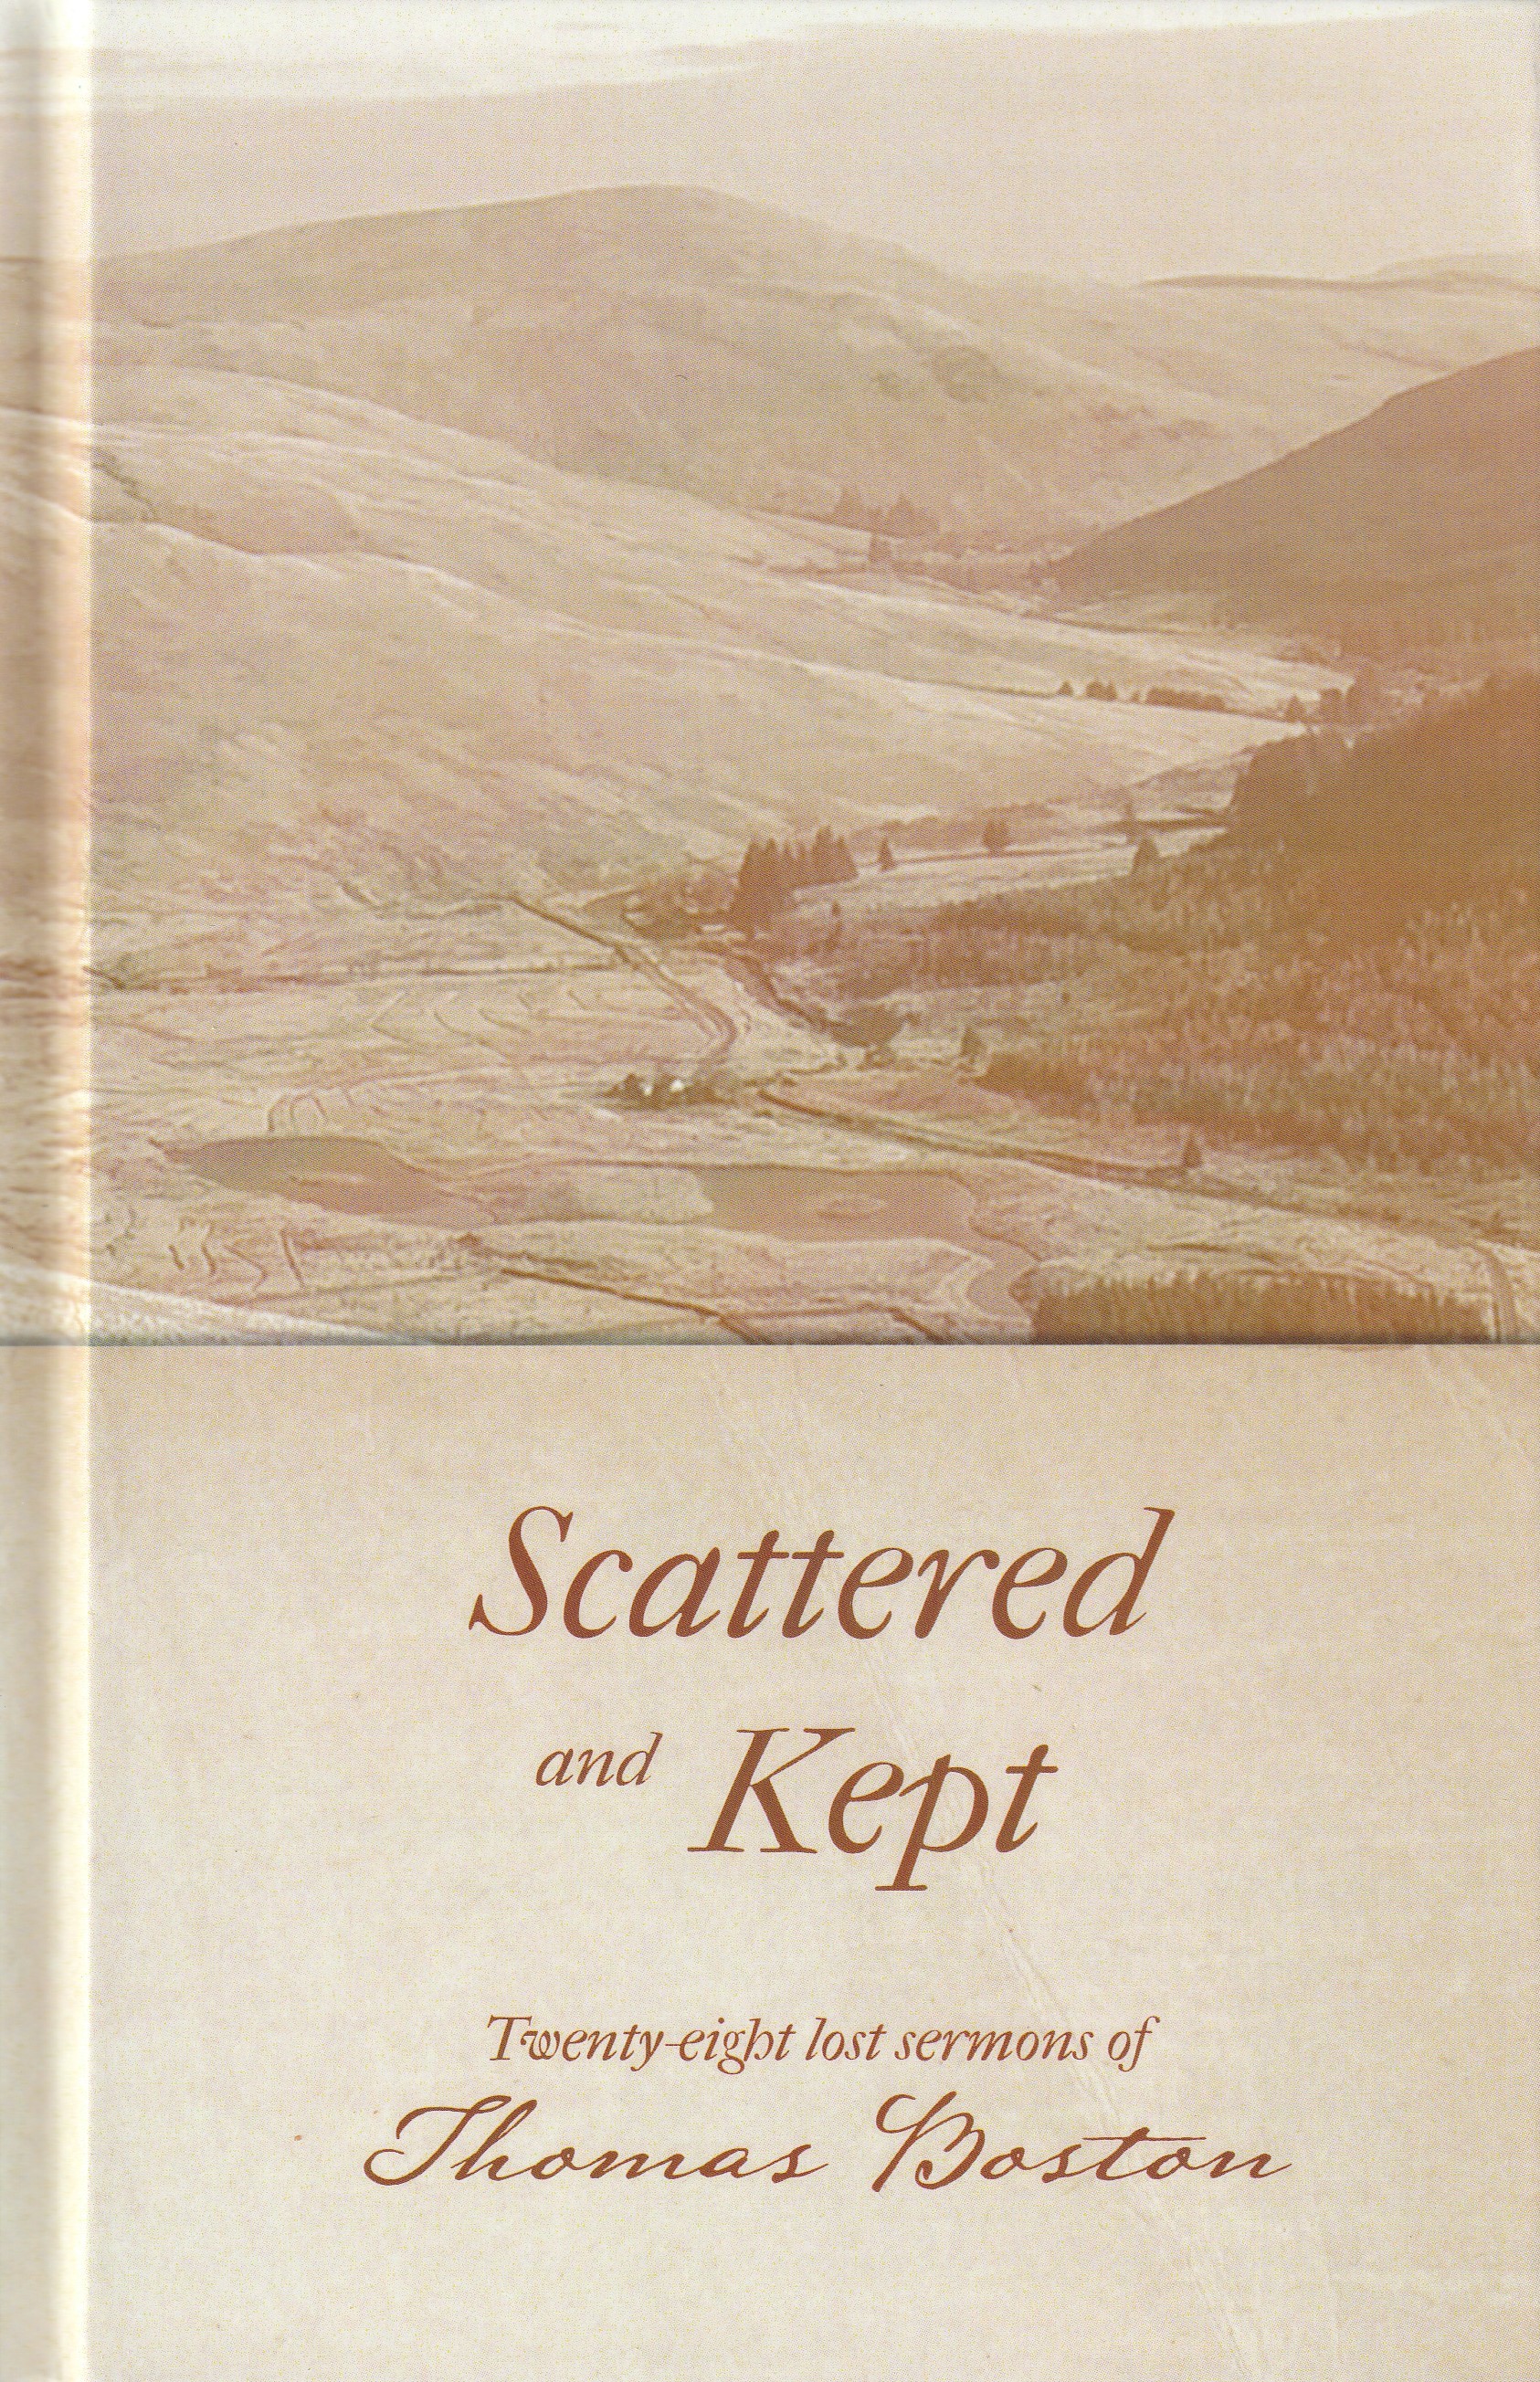 Scattered and Kept: Twenty Eight Lost Sermons of Thomas Boston